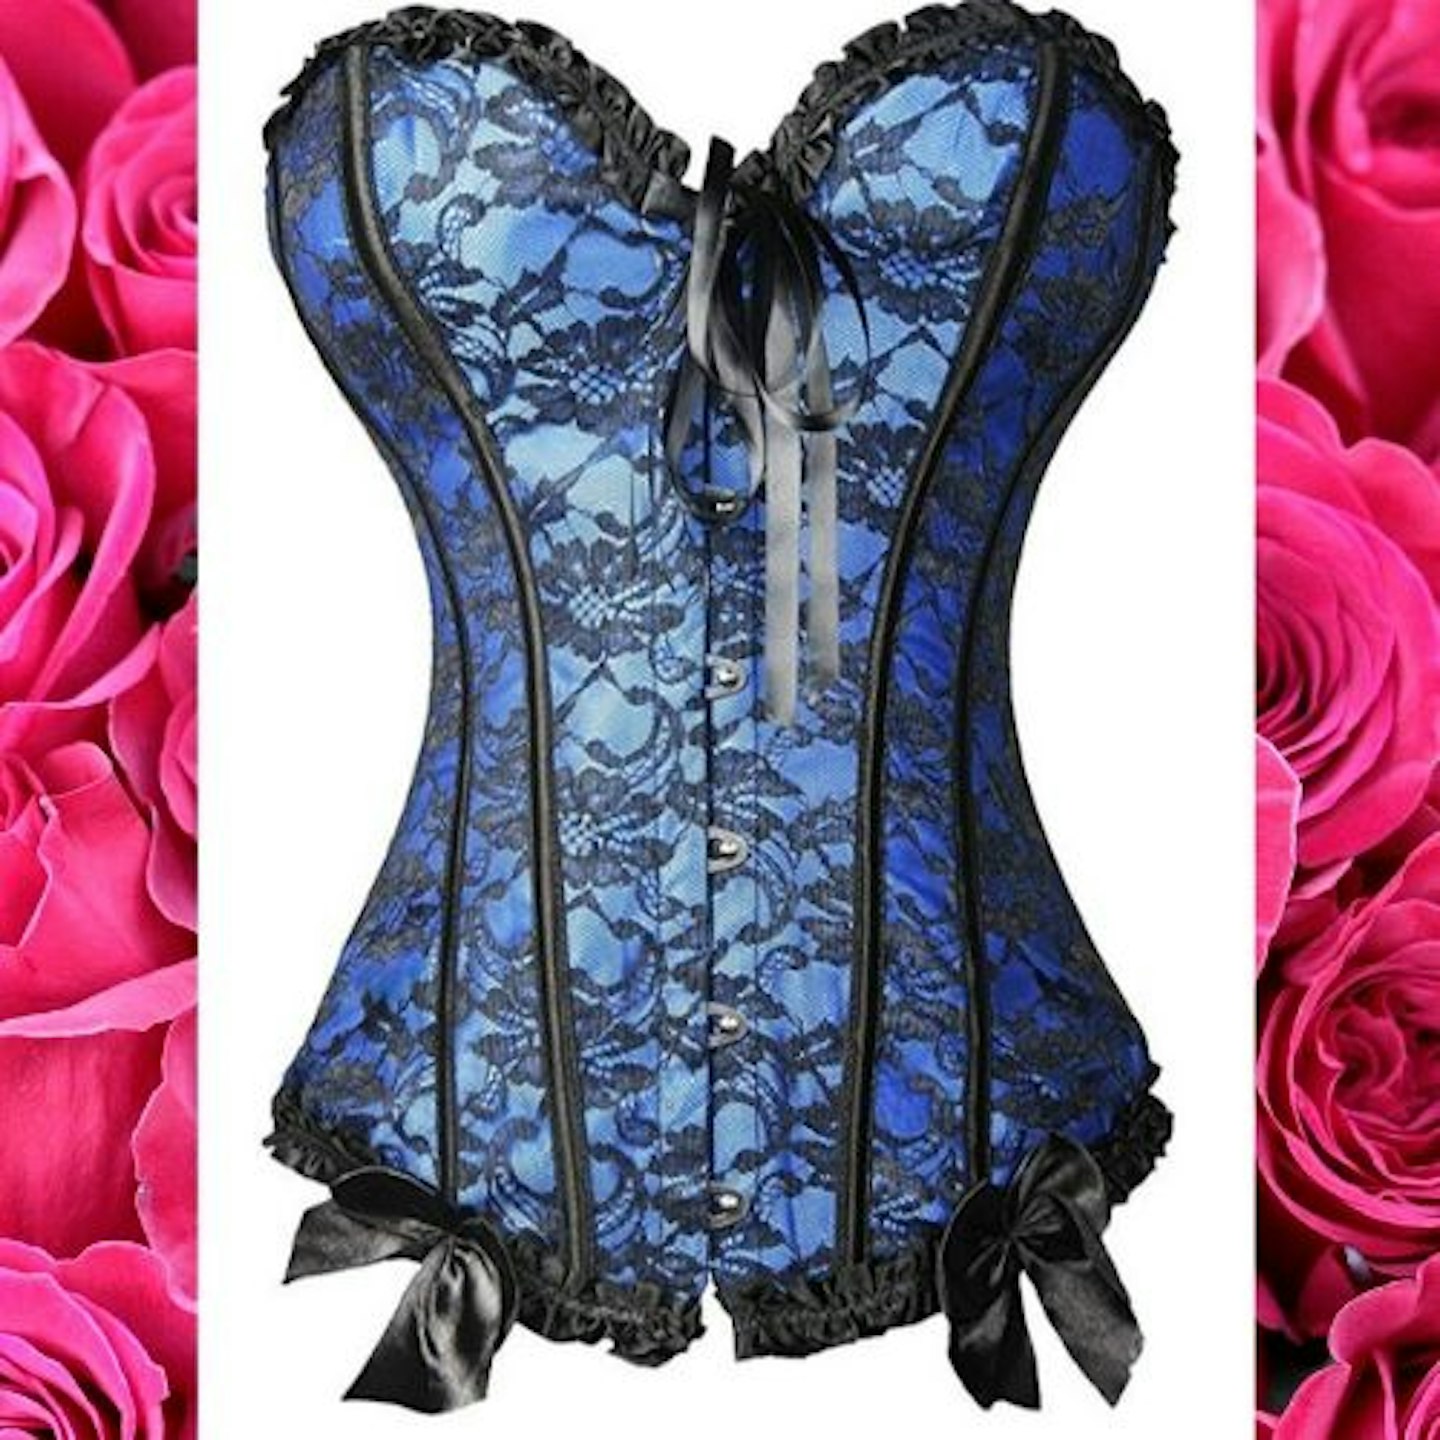 MISS MOLY Jacquard Overbust Corset Top with Suspenders